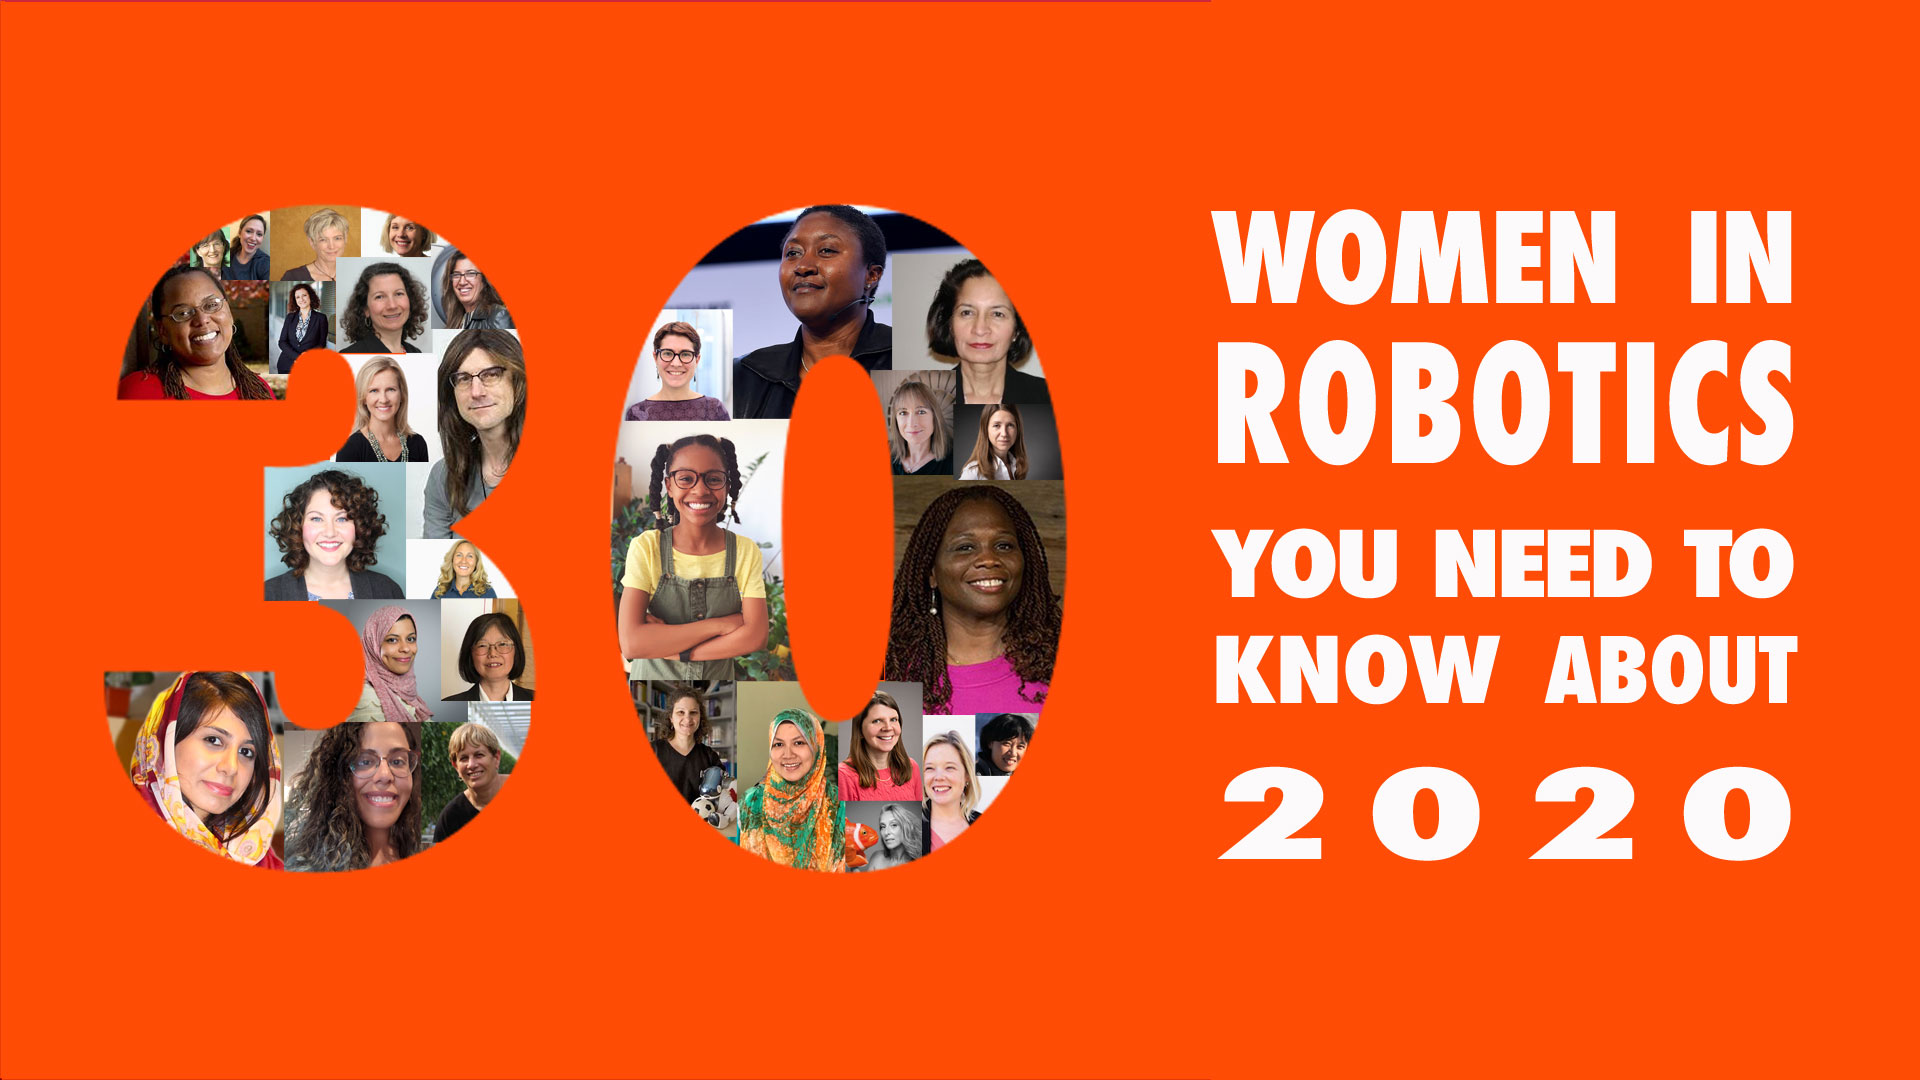 Named one of the Women In Robotics You Should Know